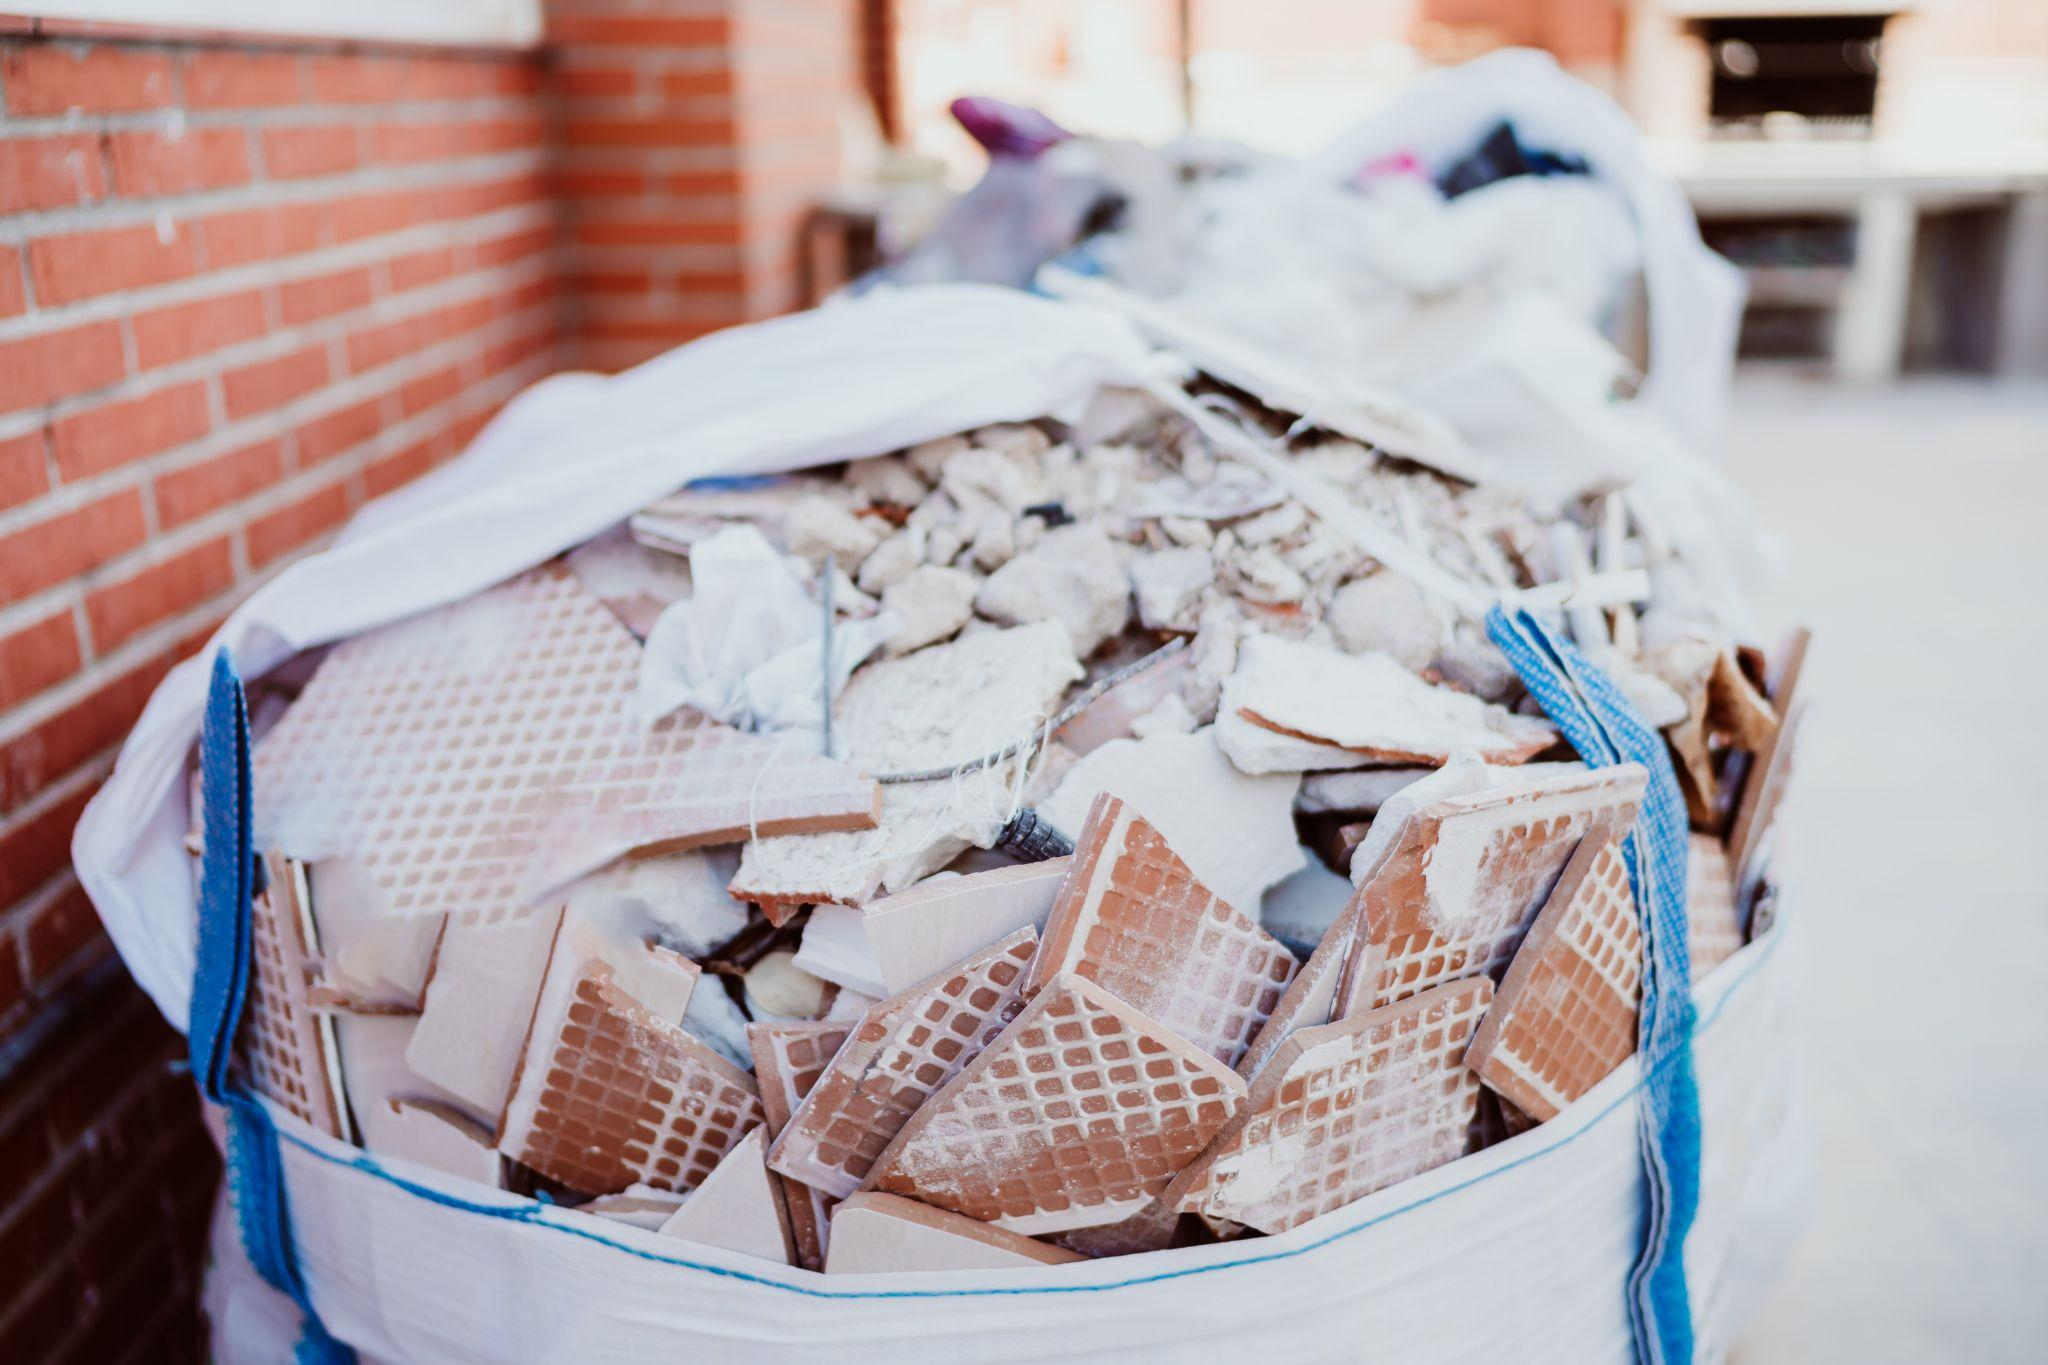 Top 7 Hassel-free Ways to dispose of waste after home Renovation